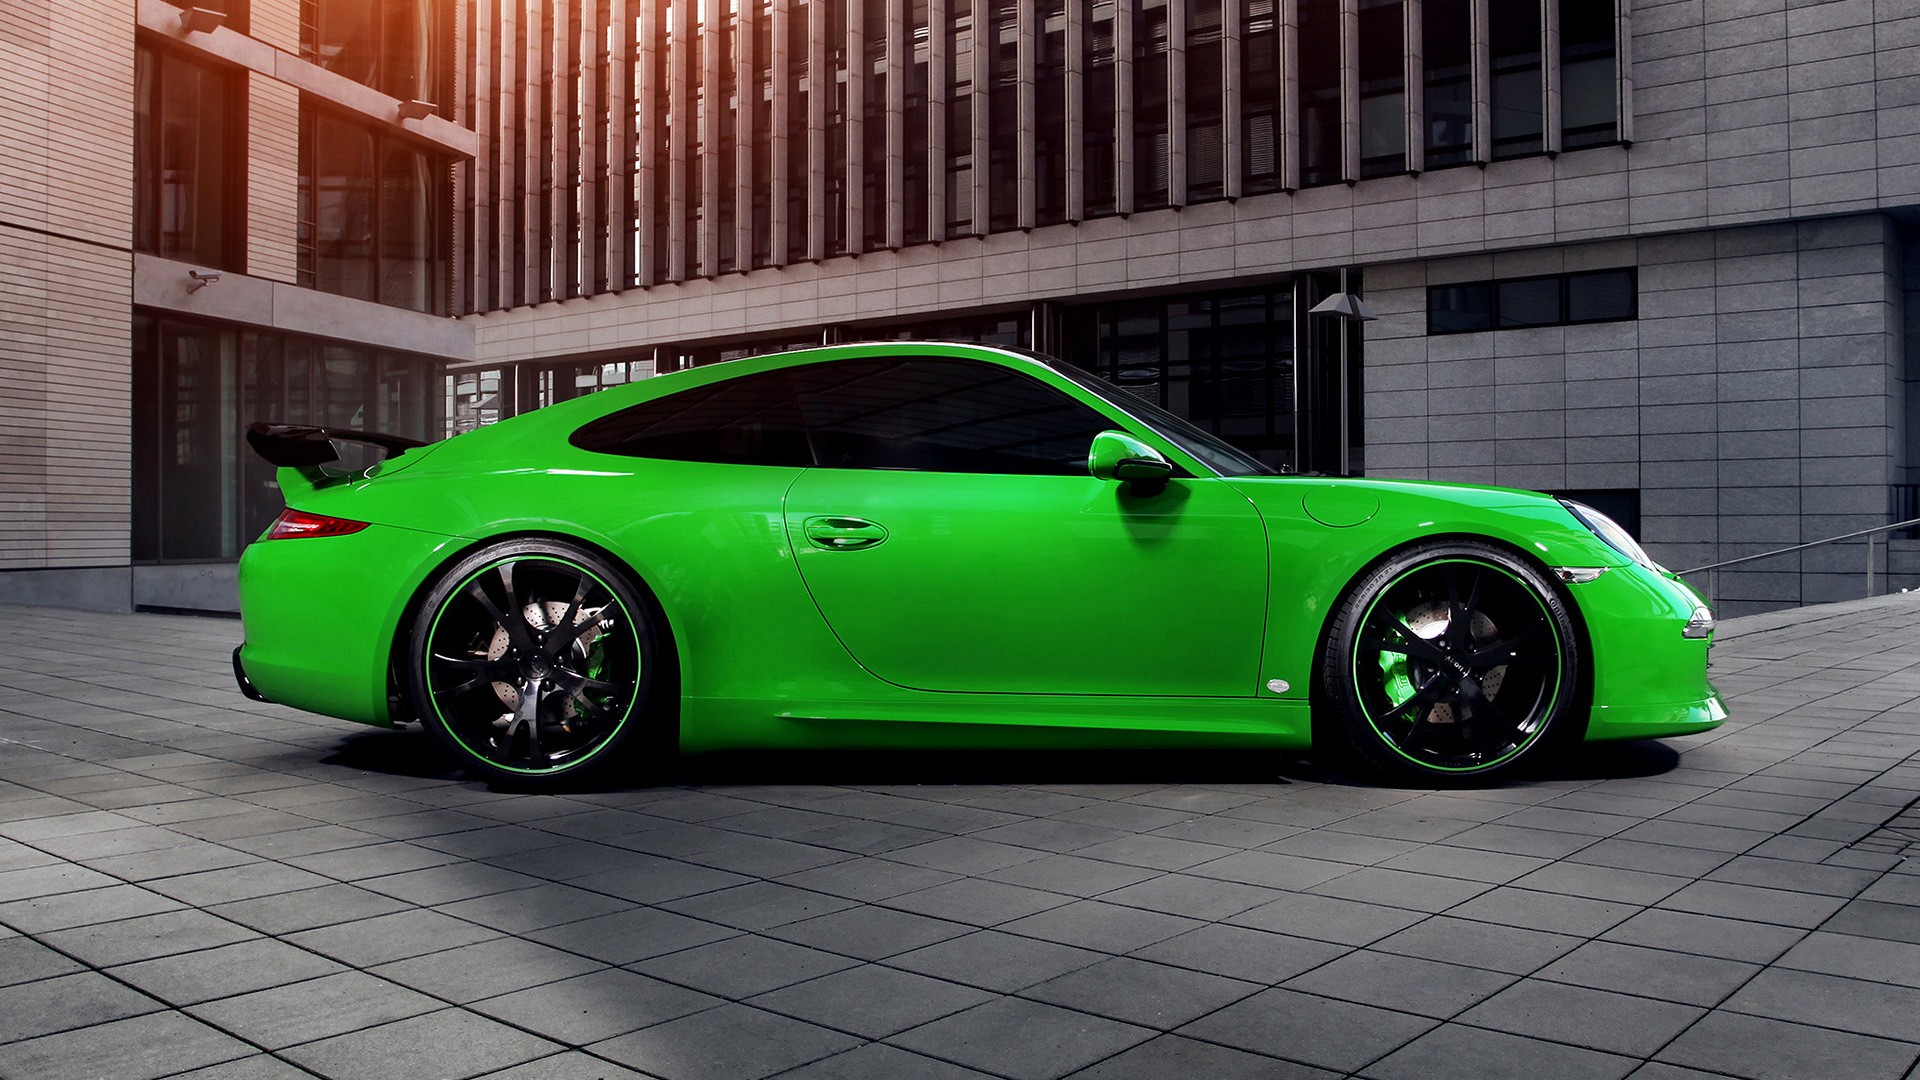 Car Porsche Porsche Carrera 4S Porsche 911 Porsche 911 Carrera 4S Green Cars Side View 1920x1080